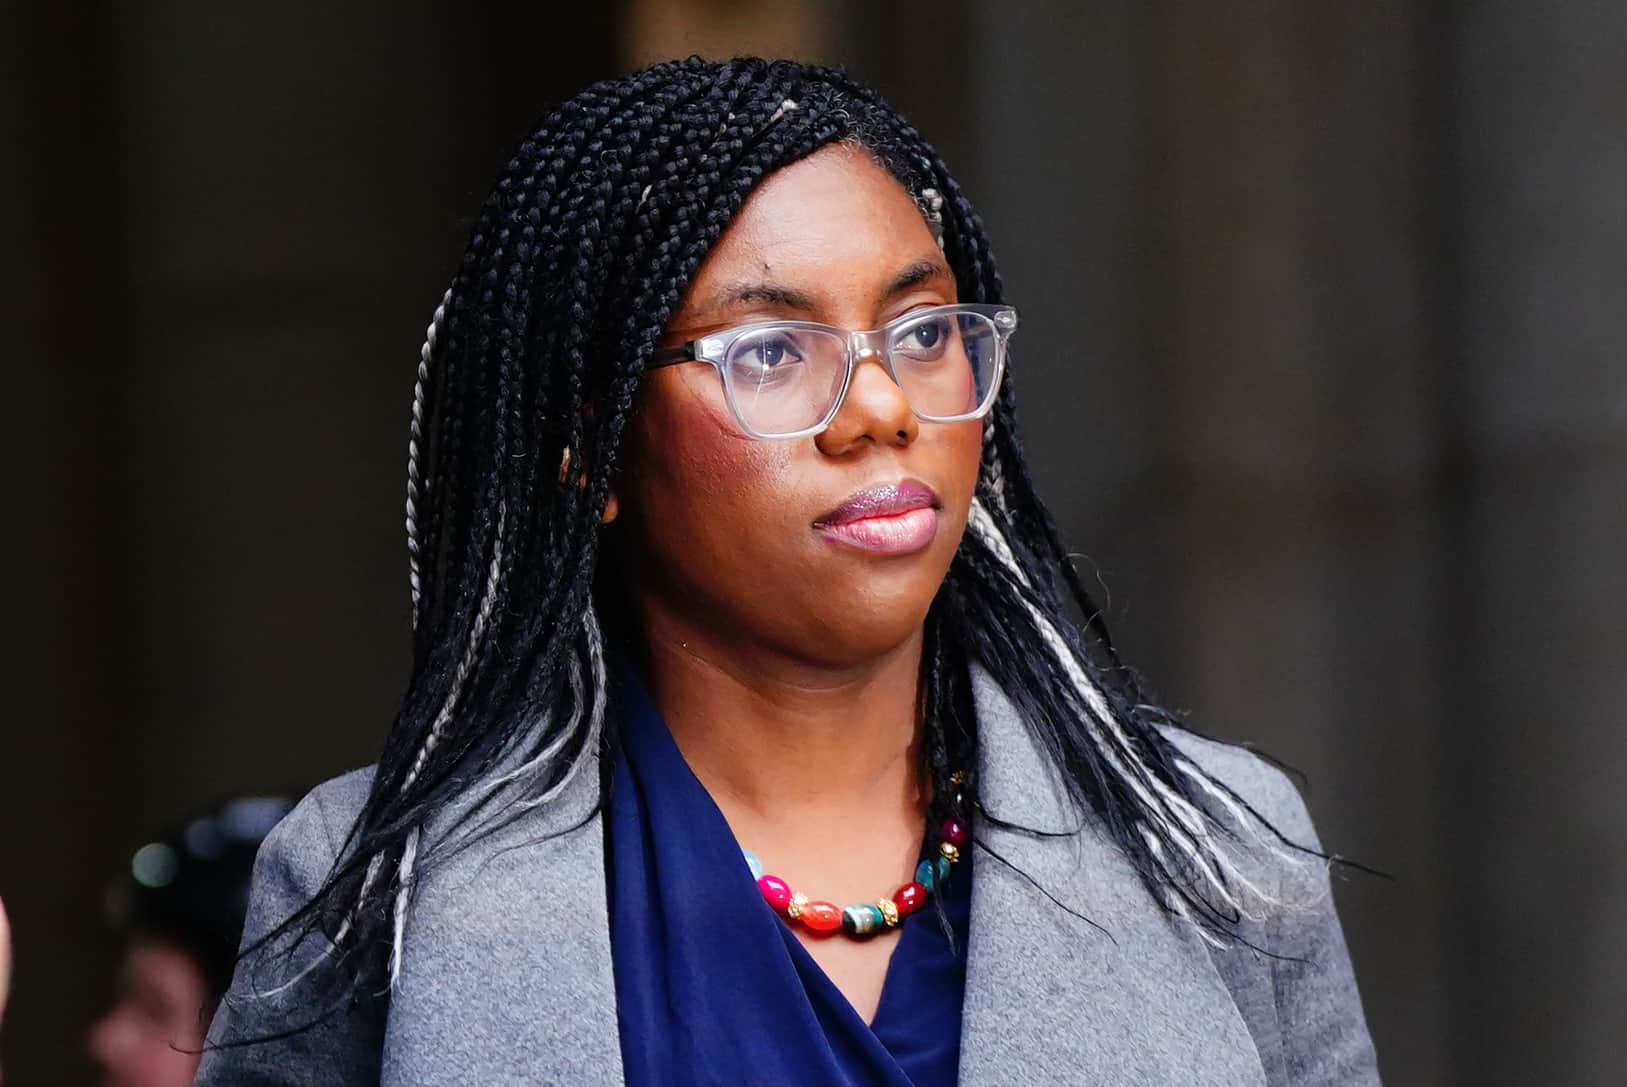 Kemi Badenoch comments point to a shift in UK Govt’s position on Gaza conflict